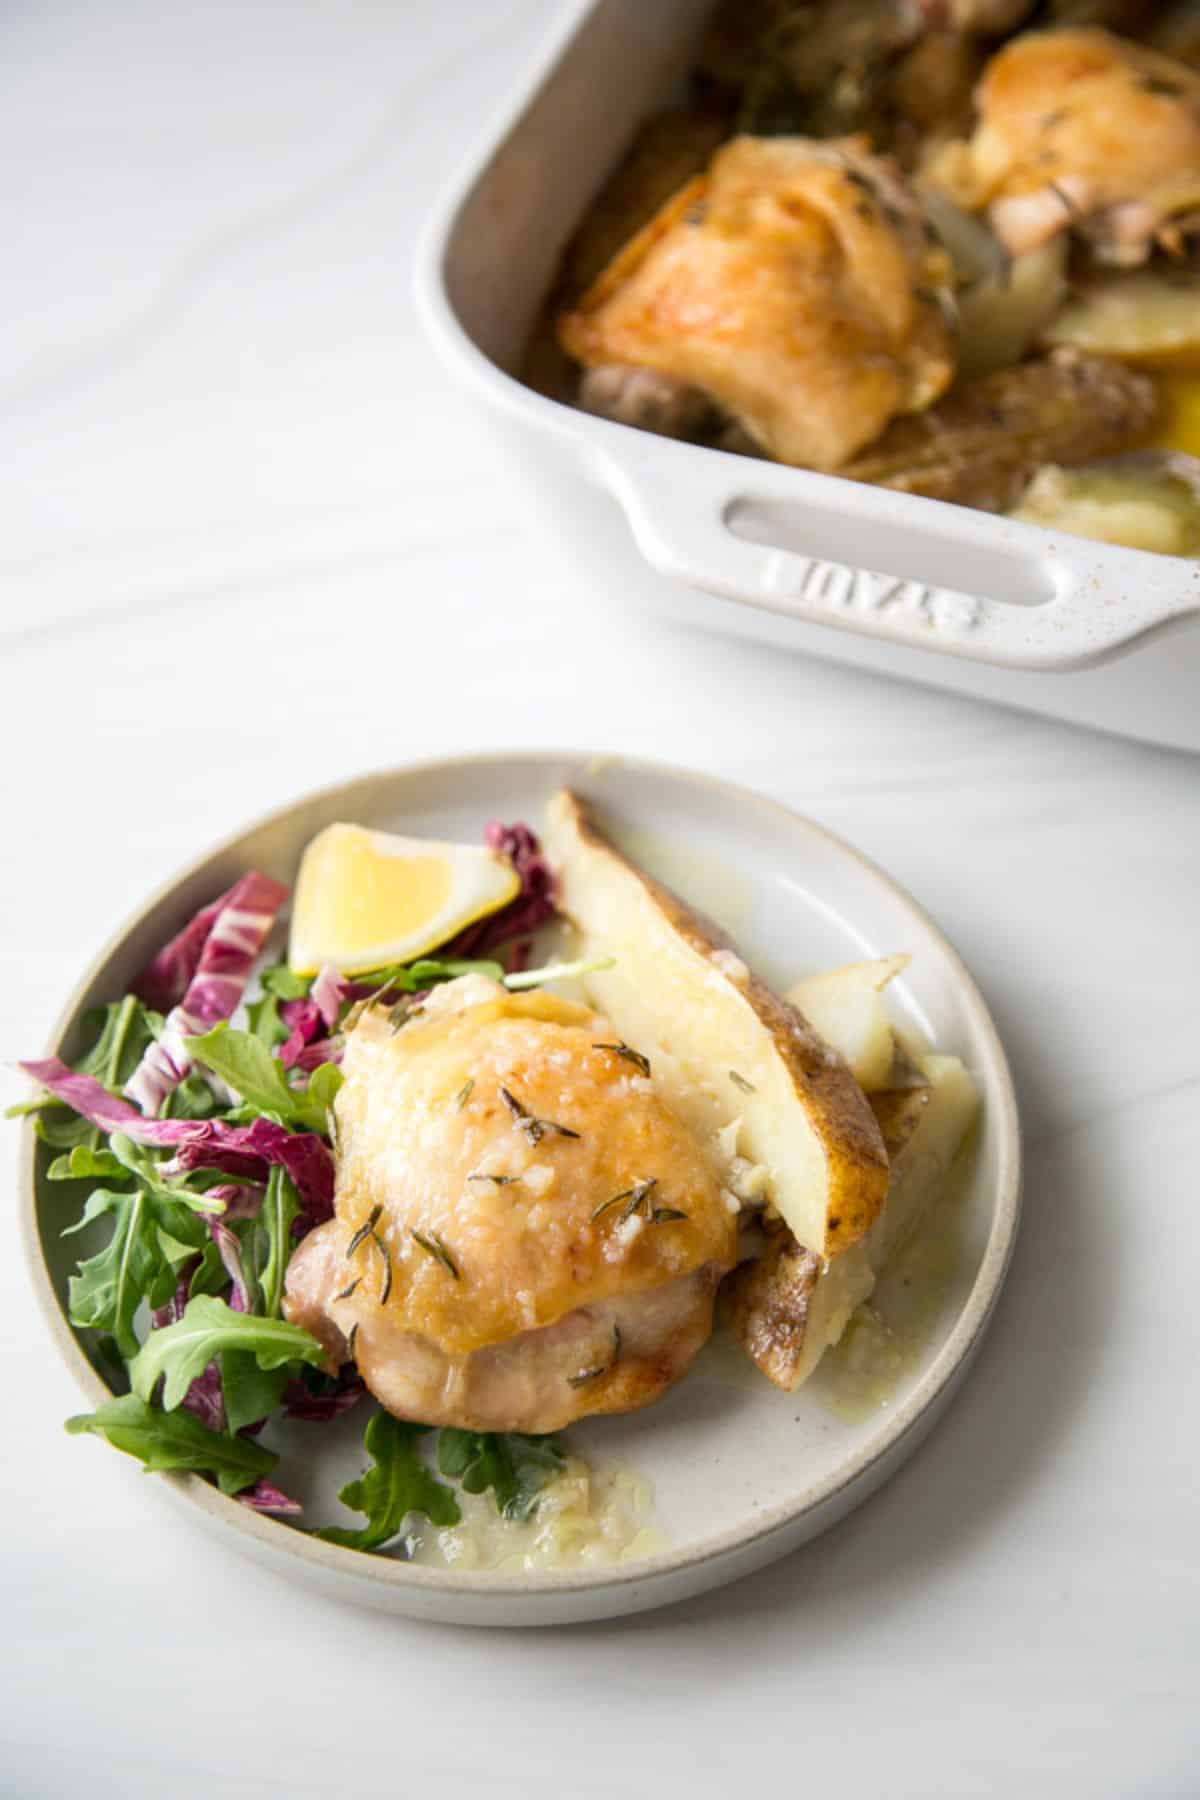 Scrumptious Greek Lemon Chicken and Potatoes on a white plate.